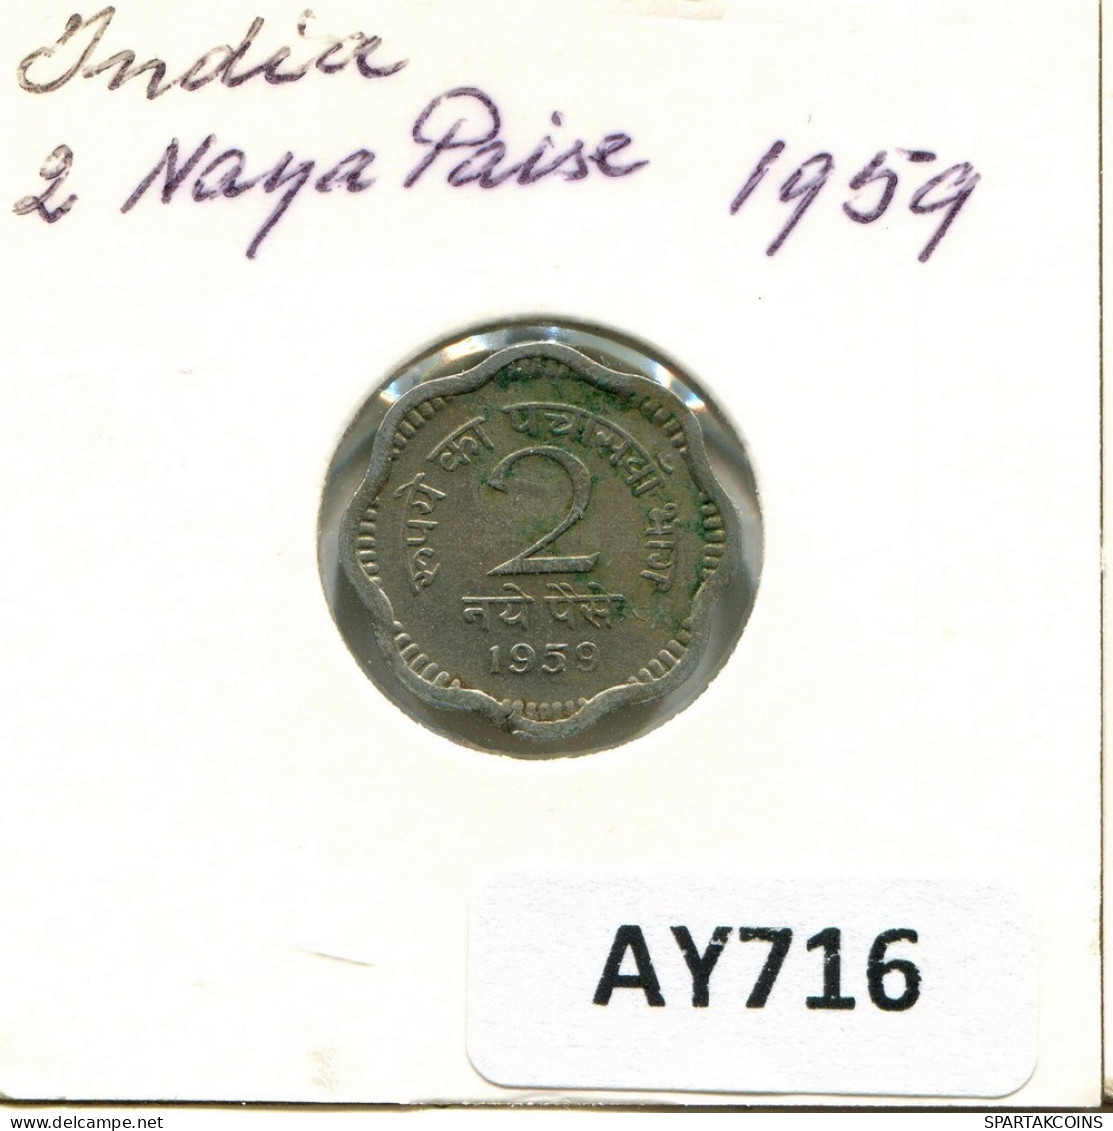 2 PAISE 1959 INDE INDIA Pièce #AY716.F.A - India